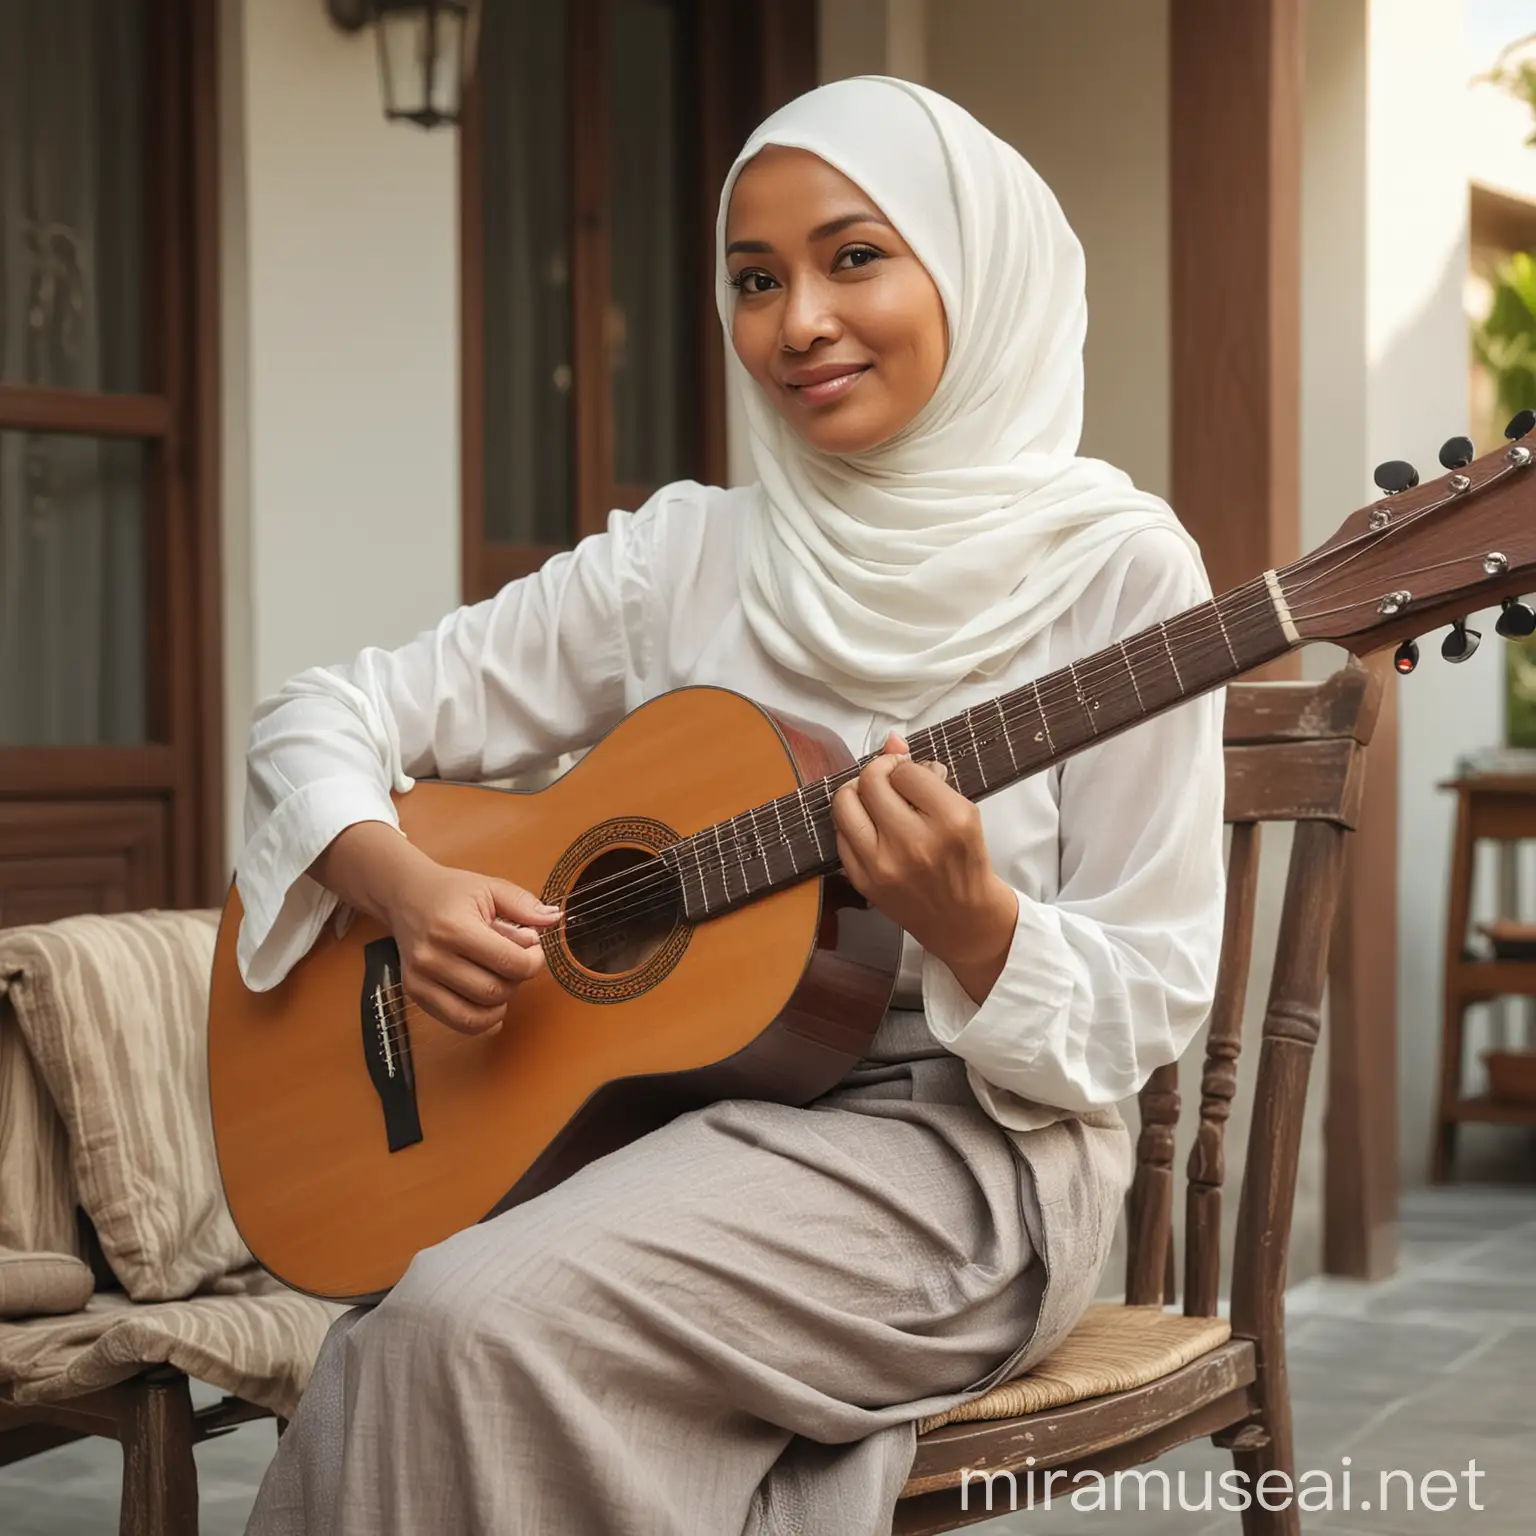 A realistic photo of a beautiful 50-year-old Indonesian woman, wearing a hijab, with a round face, sitting on a chair in front of a house terrace, playing a guitar, daytime atmosphere, quite bright light, very lifelike, full HD, sharp focus without flaws.